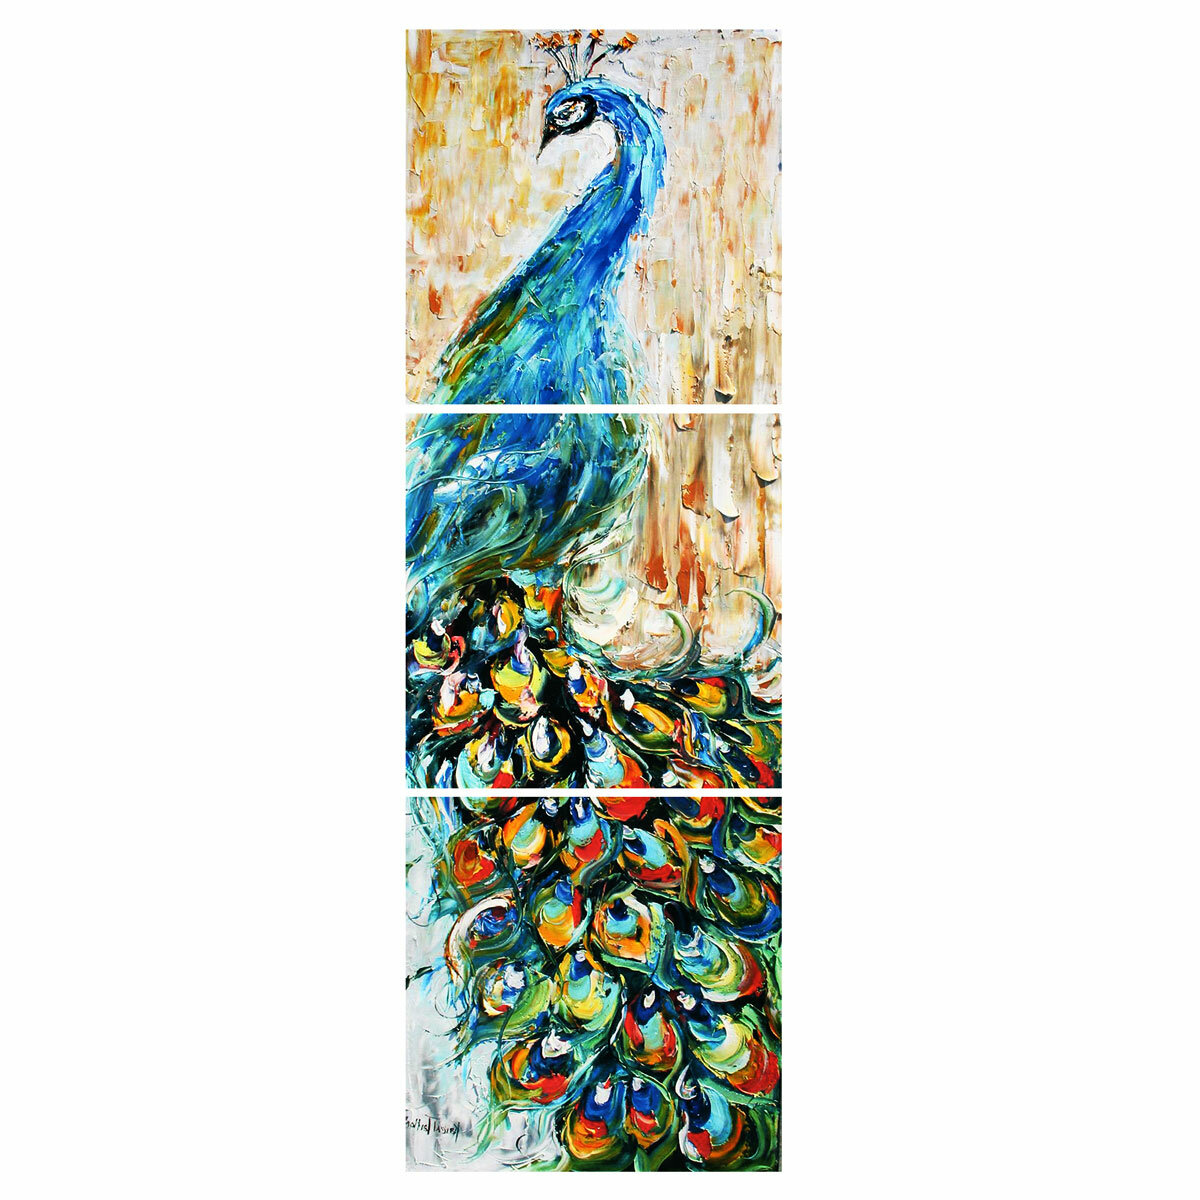 

3Pcs/set HD Peacock Wall Decorative Paintings Canvas Print Art Pictures Frameless Wall Hanging Decorations for Home Offi